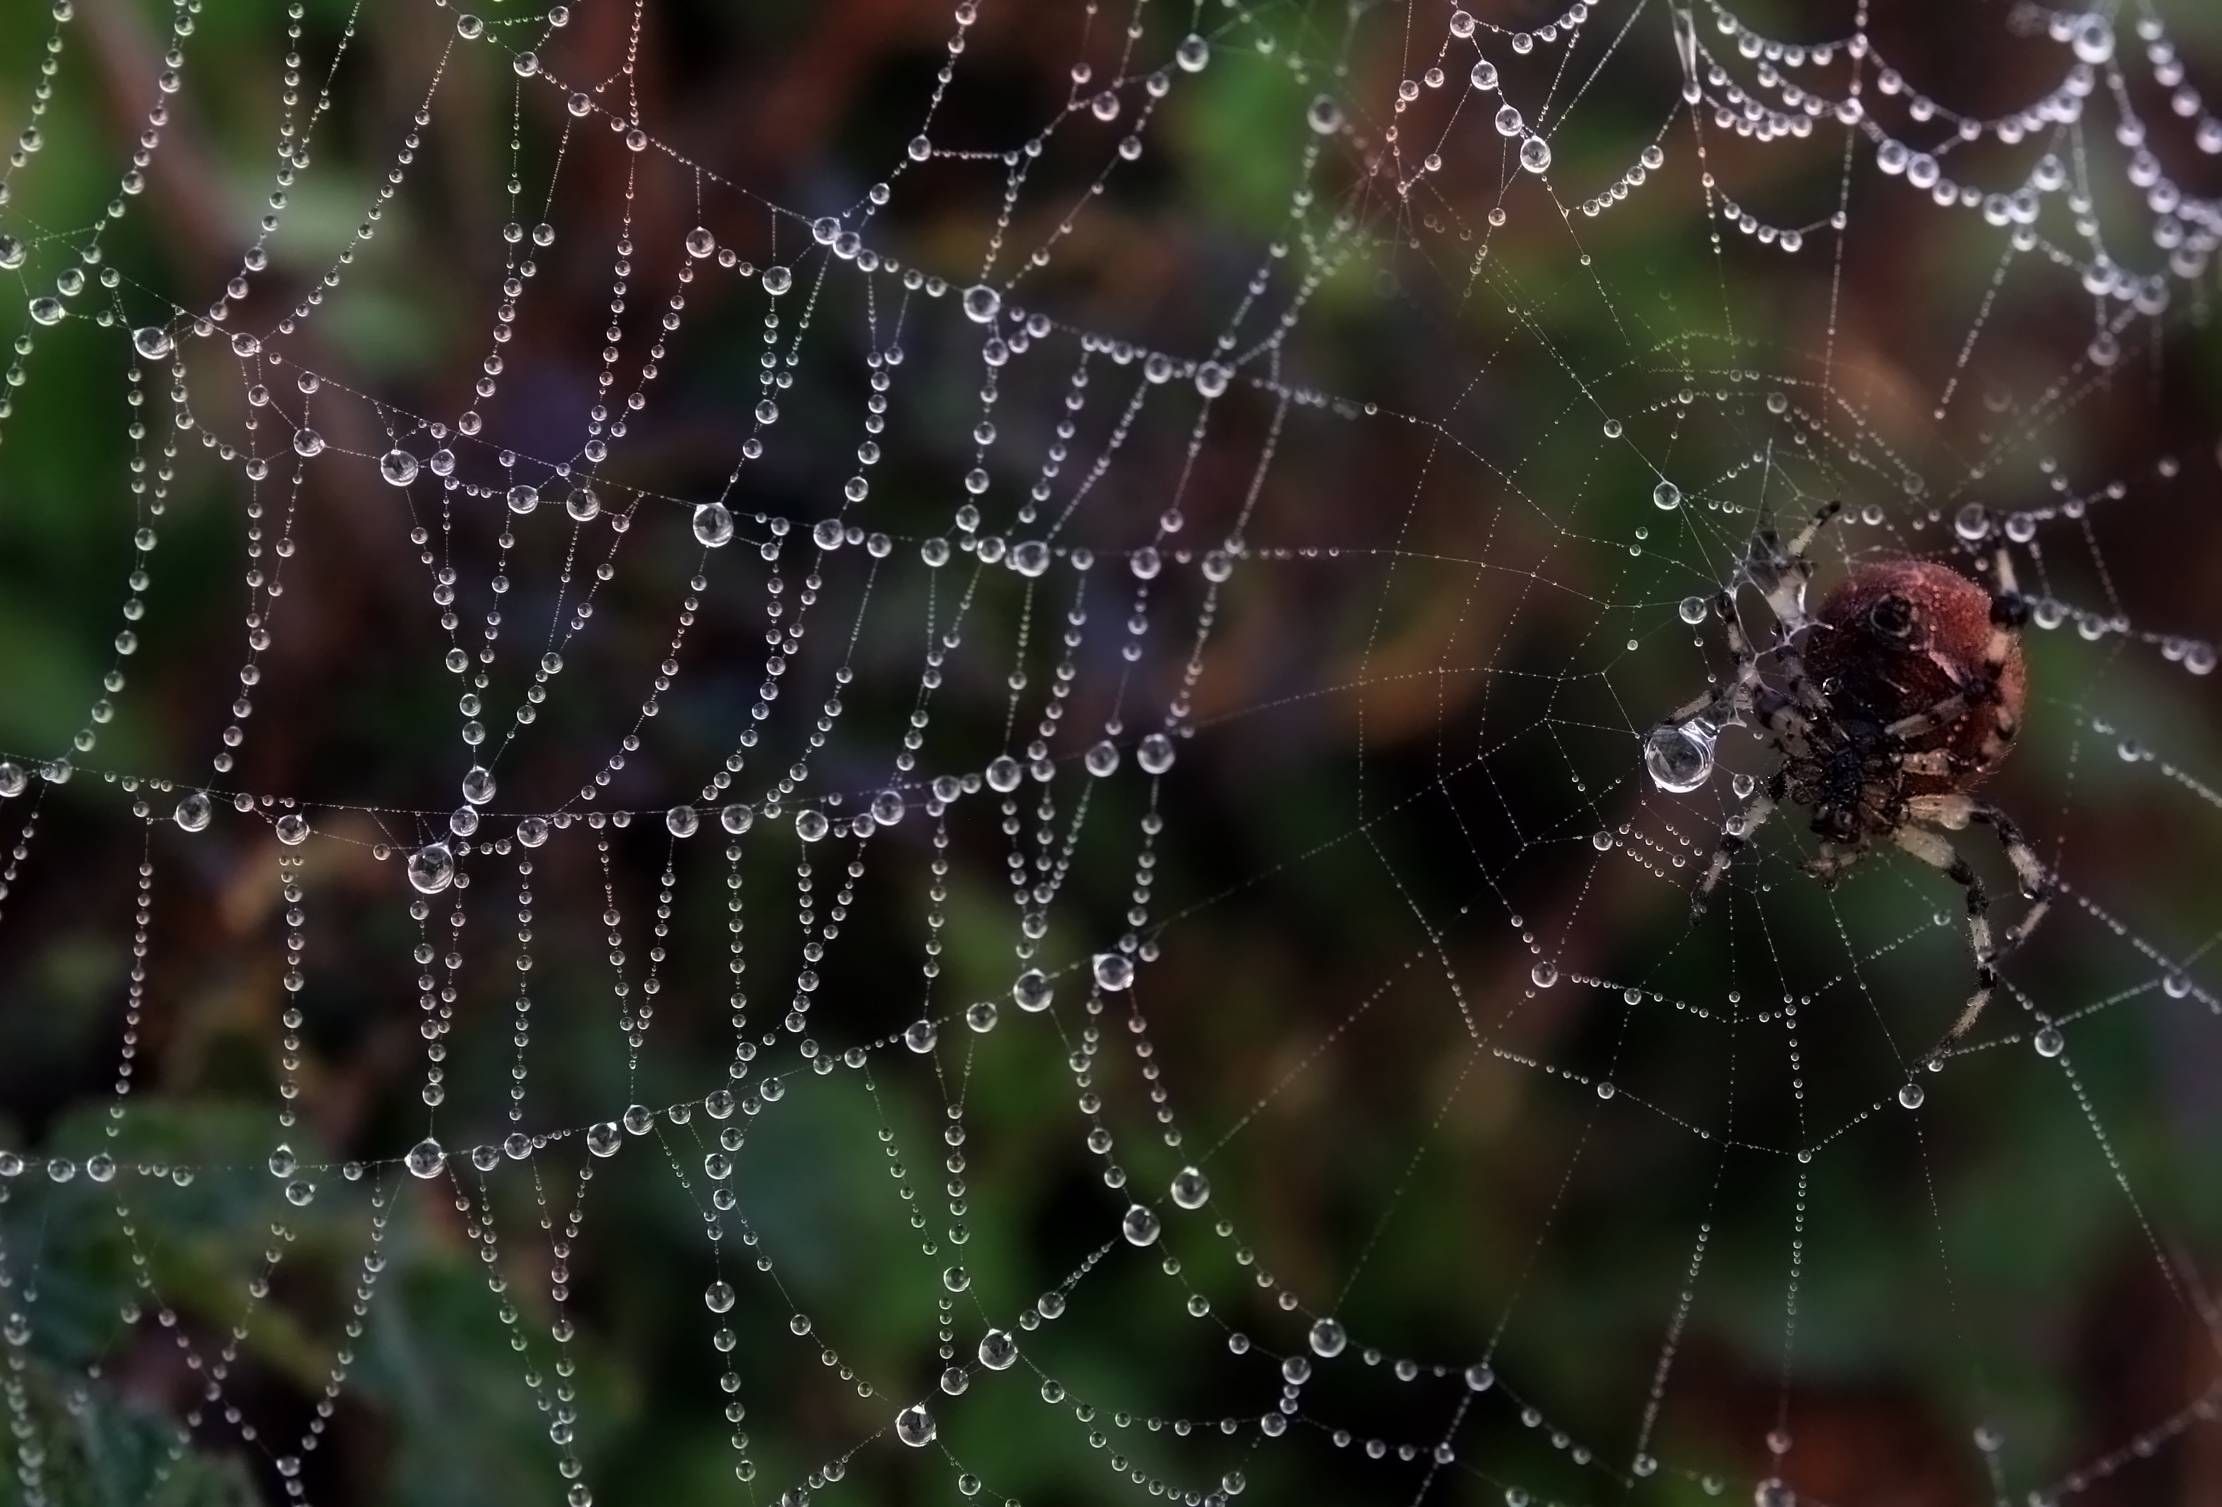 Araneus trifolium and its web with fog droplets